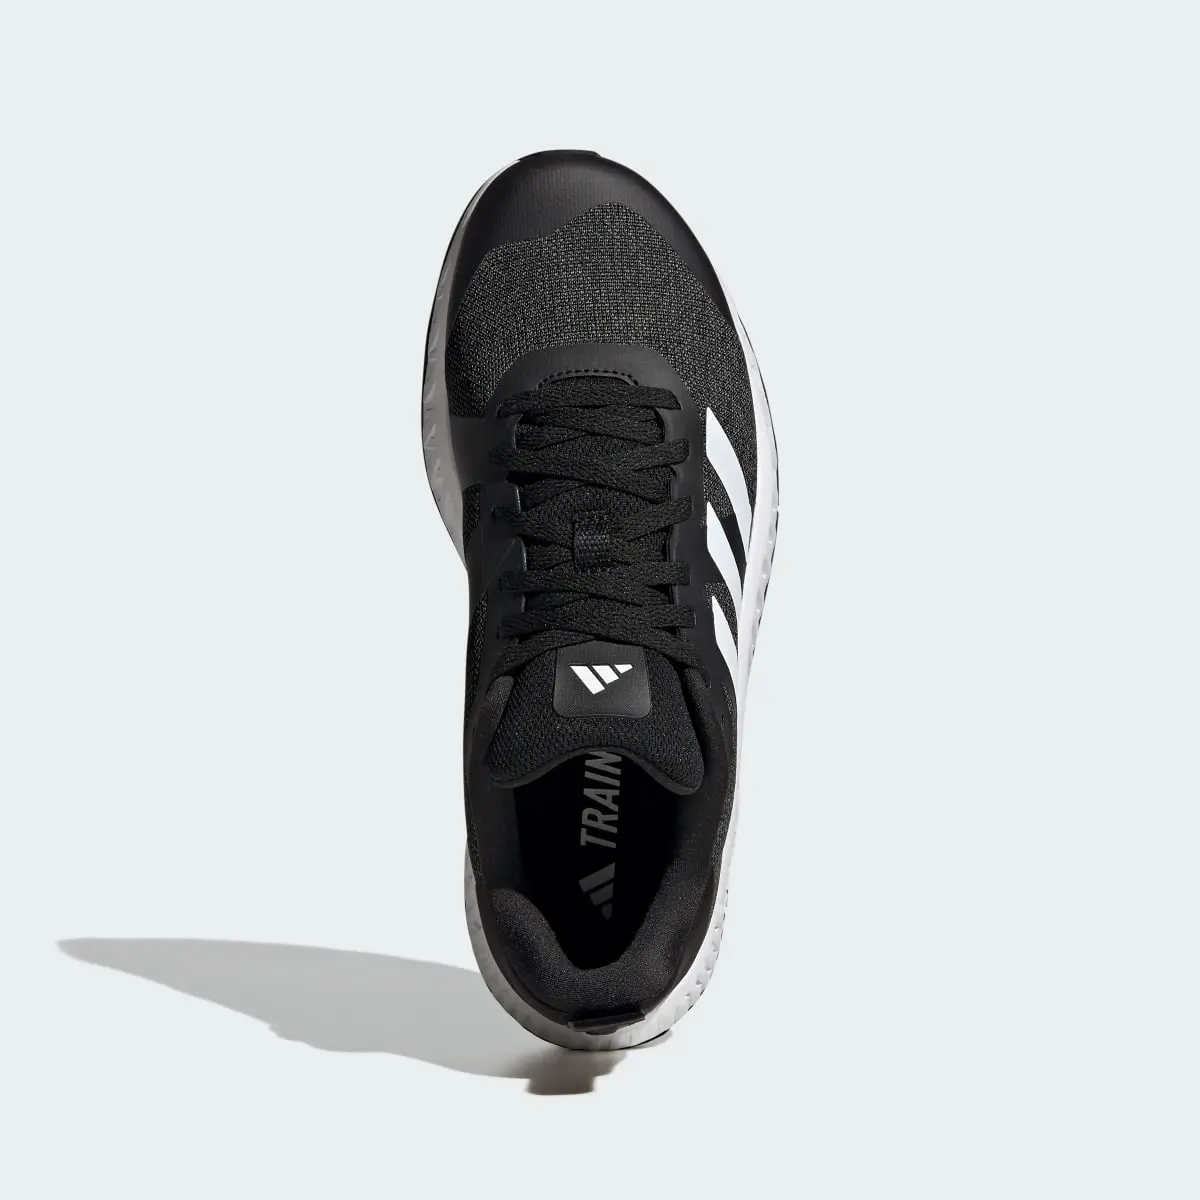 Adidas Everyset Trainer Shoes. 3